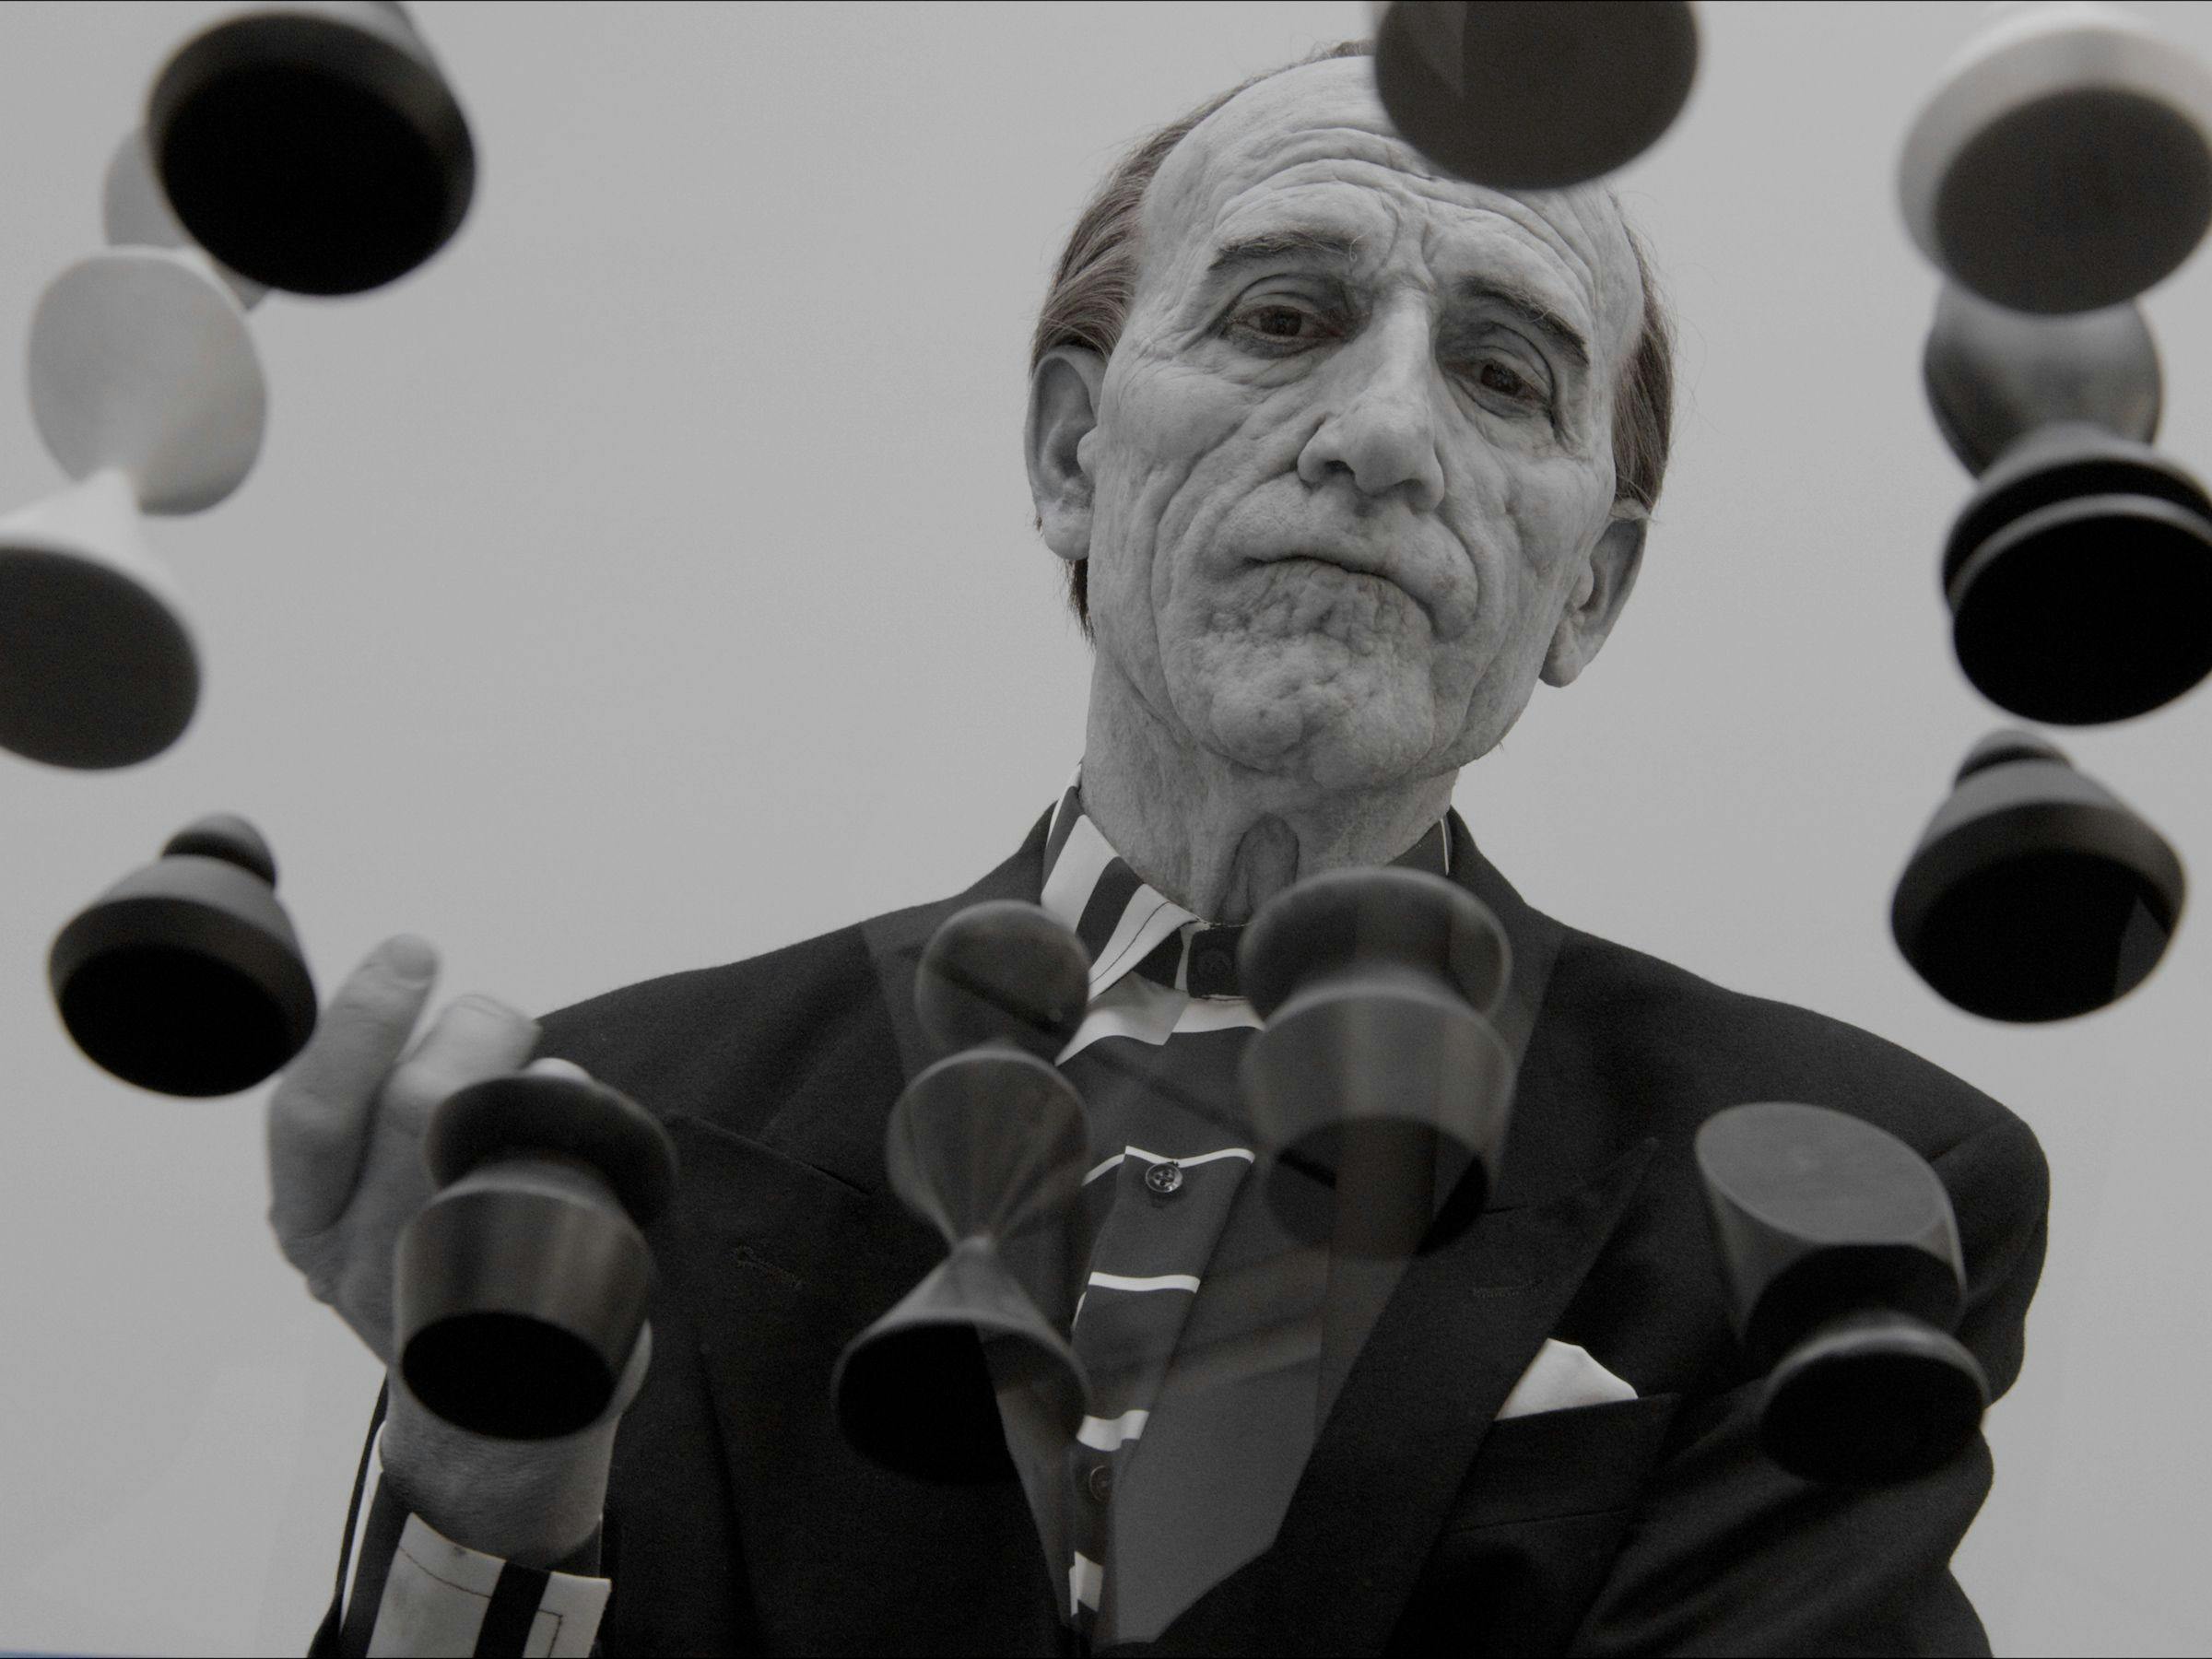 a black and white image of an elderly man wearing a black suit is playing chess. We can see him from underneath and through a glass table.